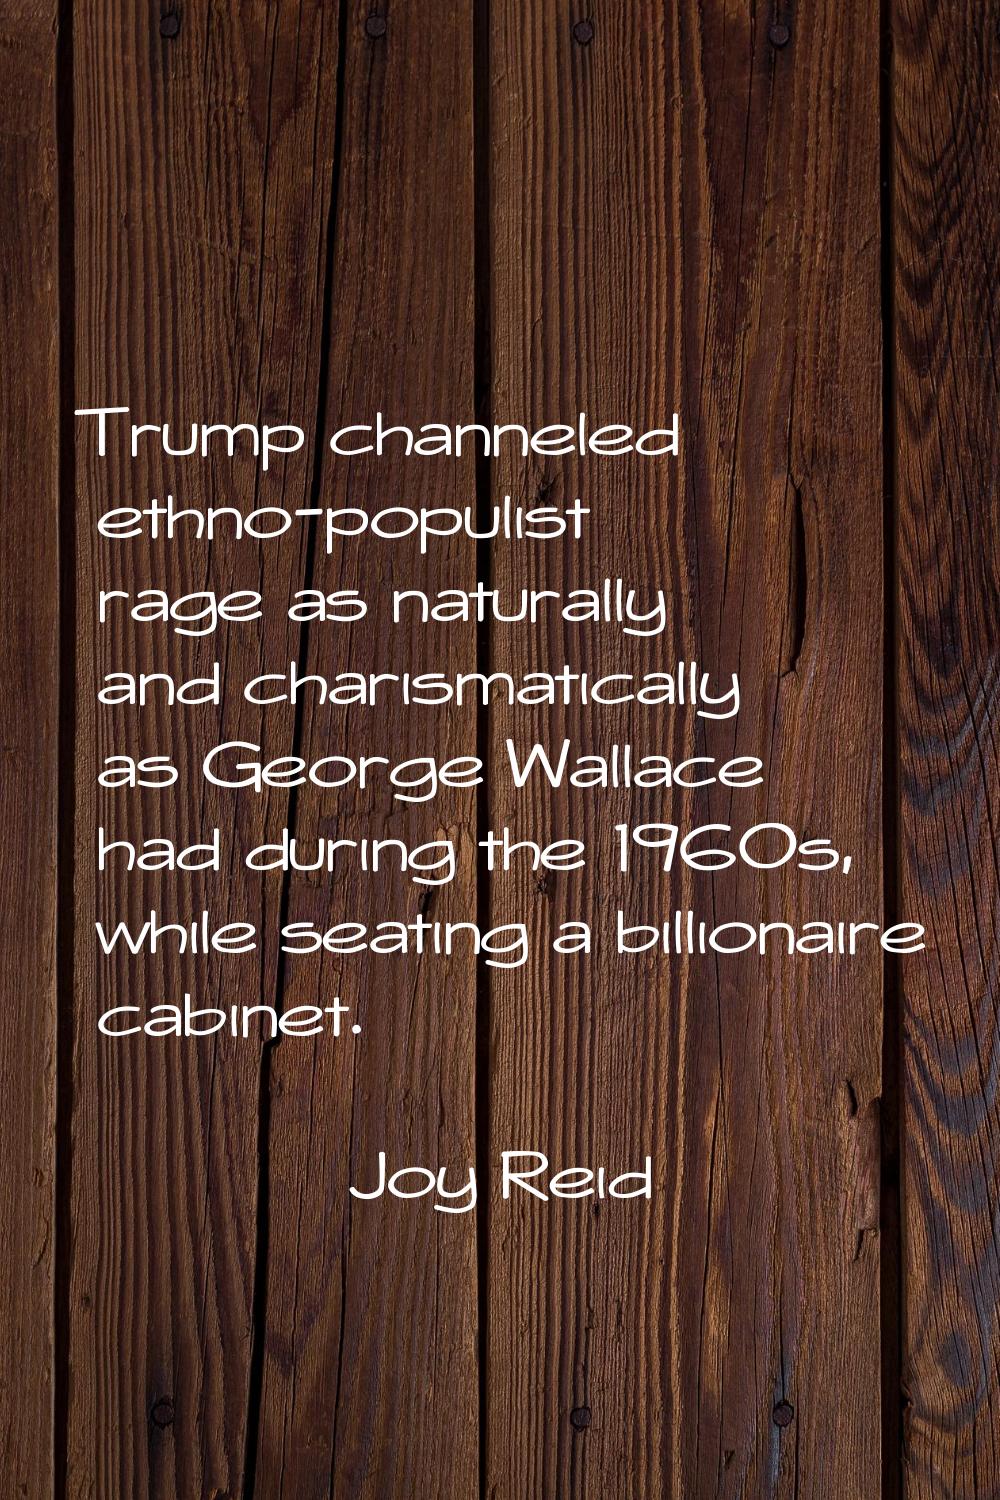 Trump channeled ethno-populist rage as naturally and charismatically as George Wallace had during t